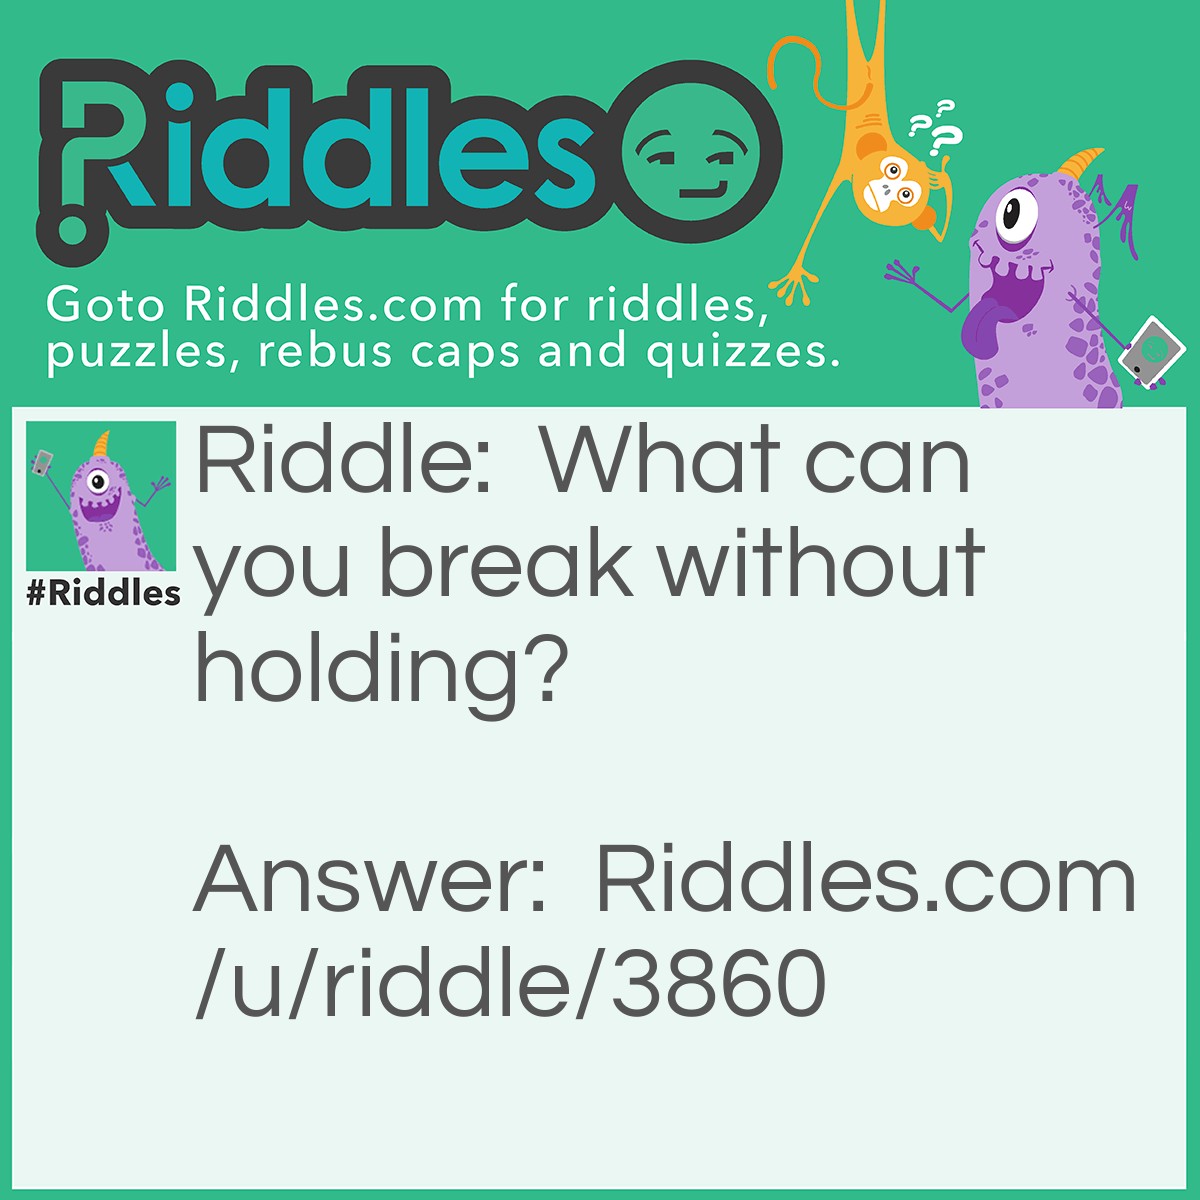 Riddle: What can you break without holding? Answer: A Promise.